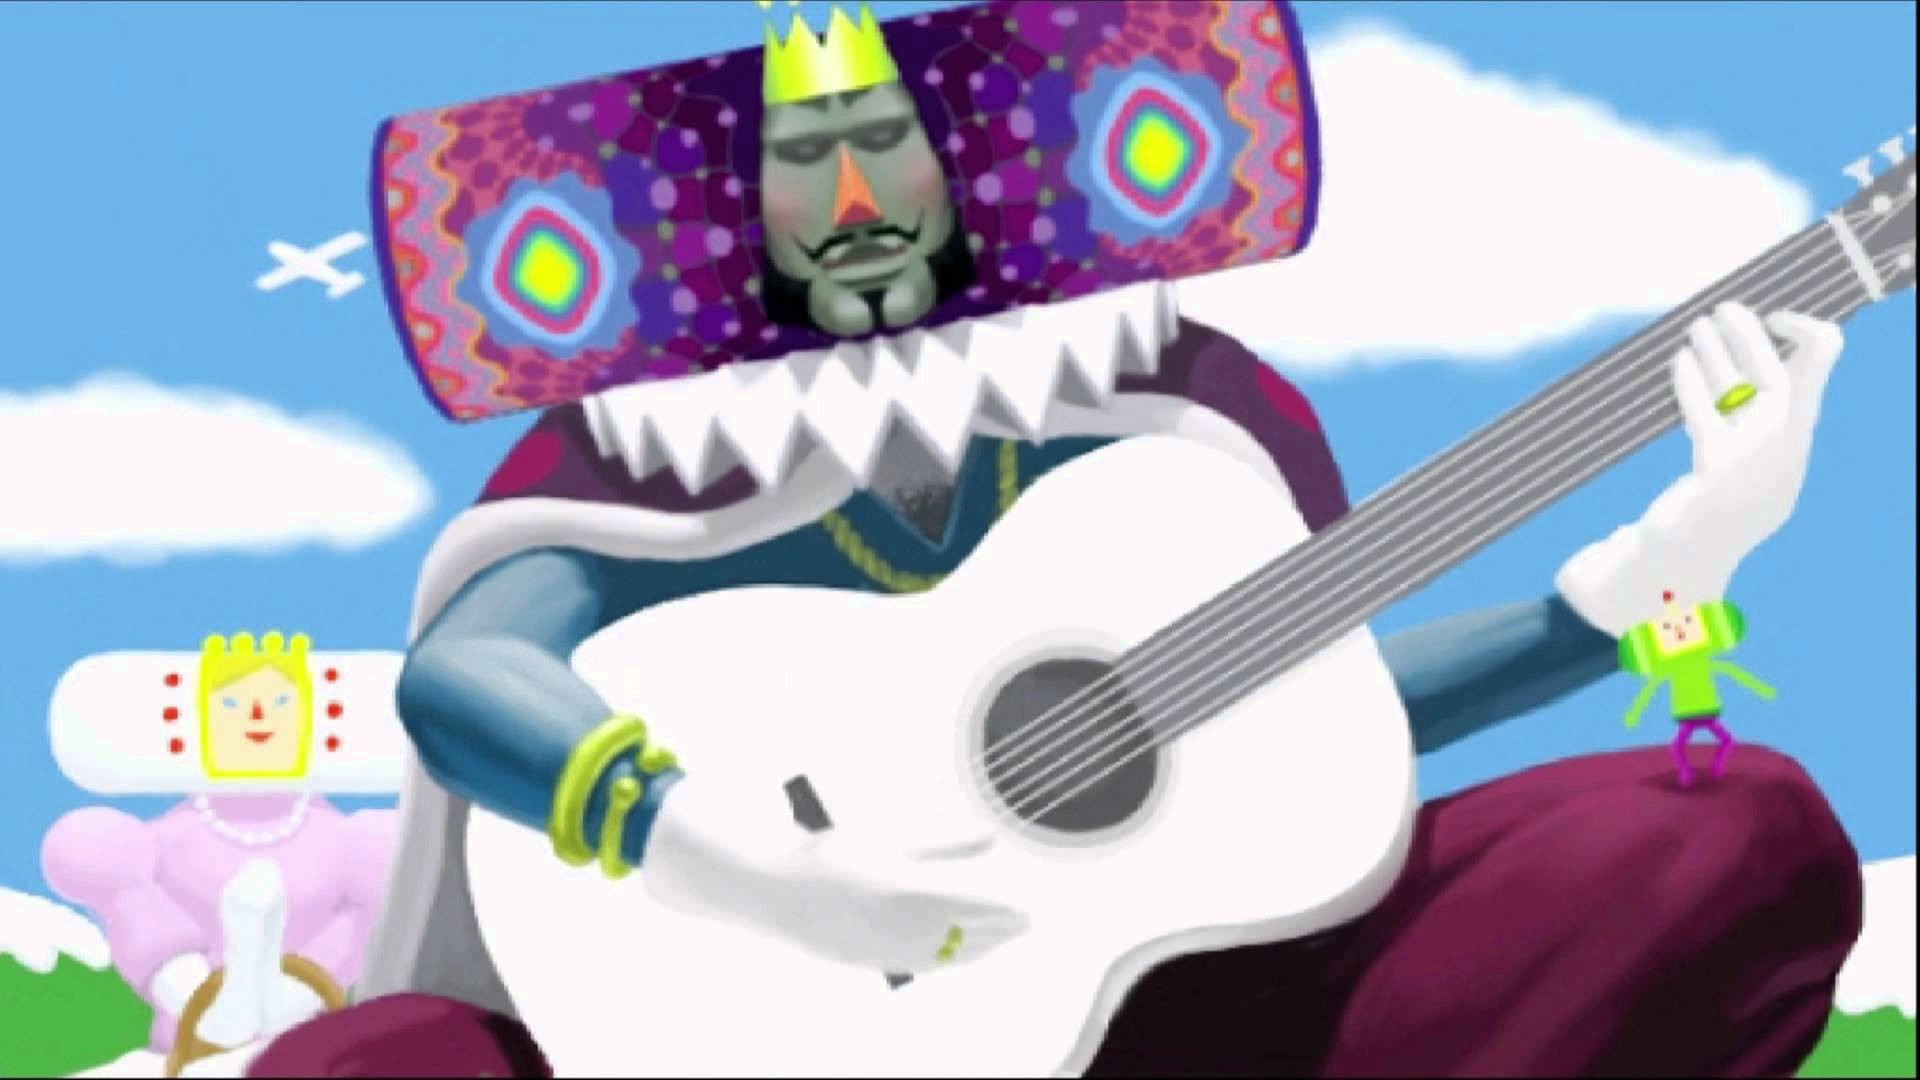 1920x1080 Katamari Damacy - The Best Video Game Intro of All Time